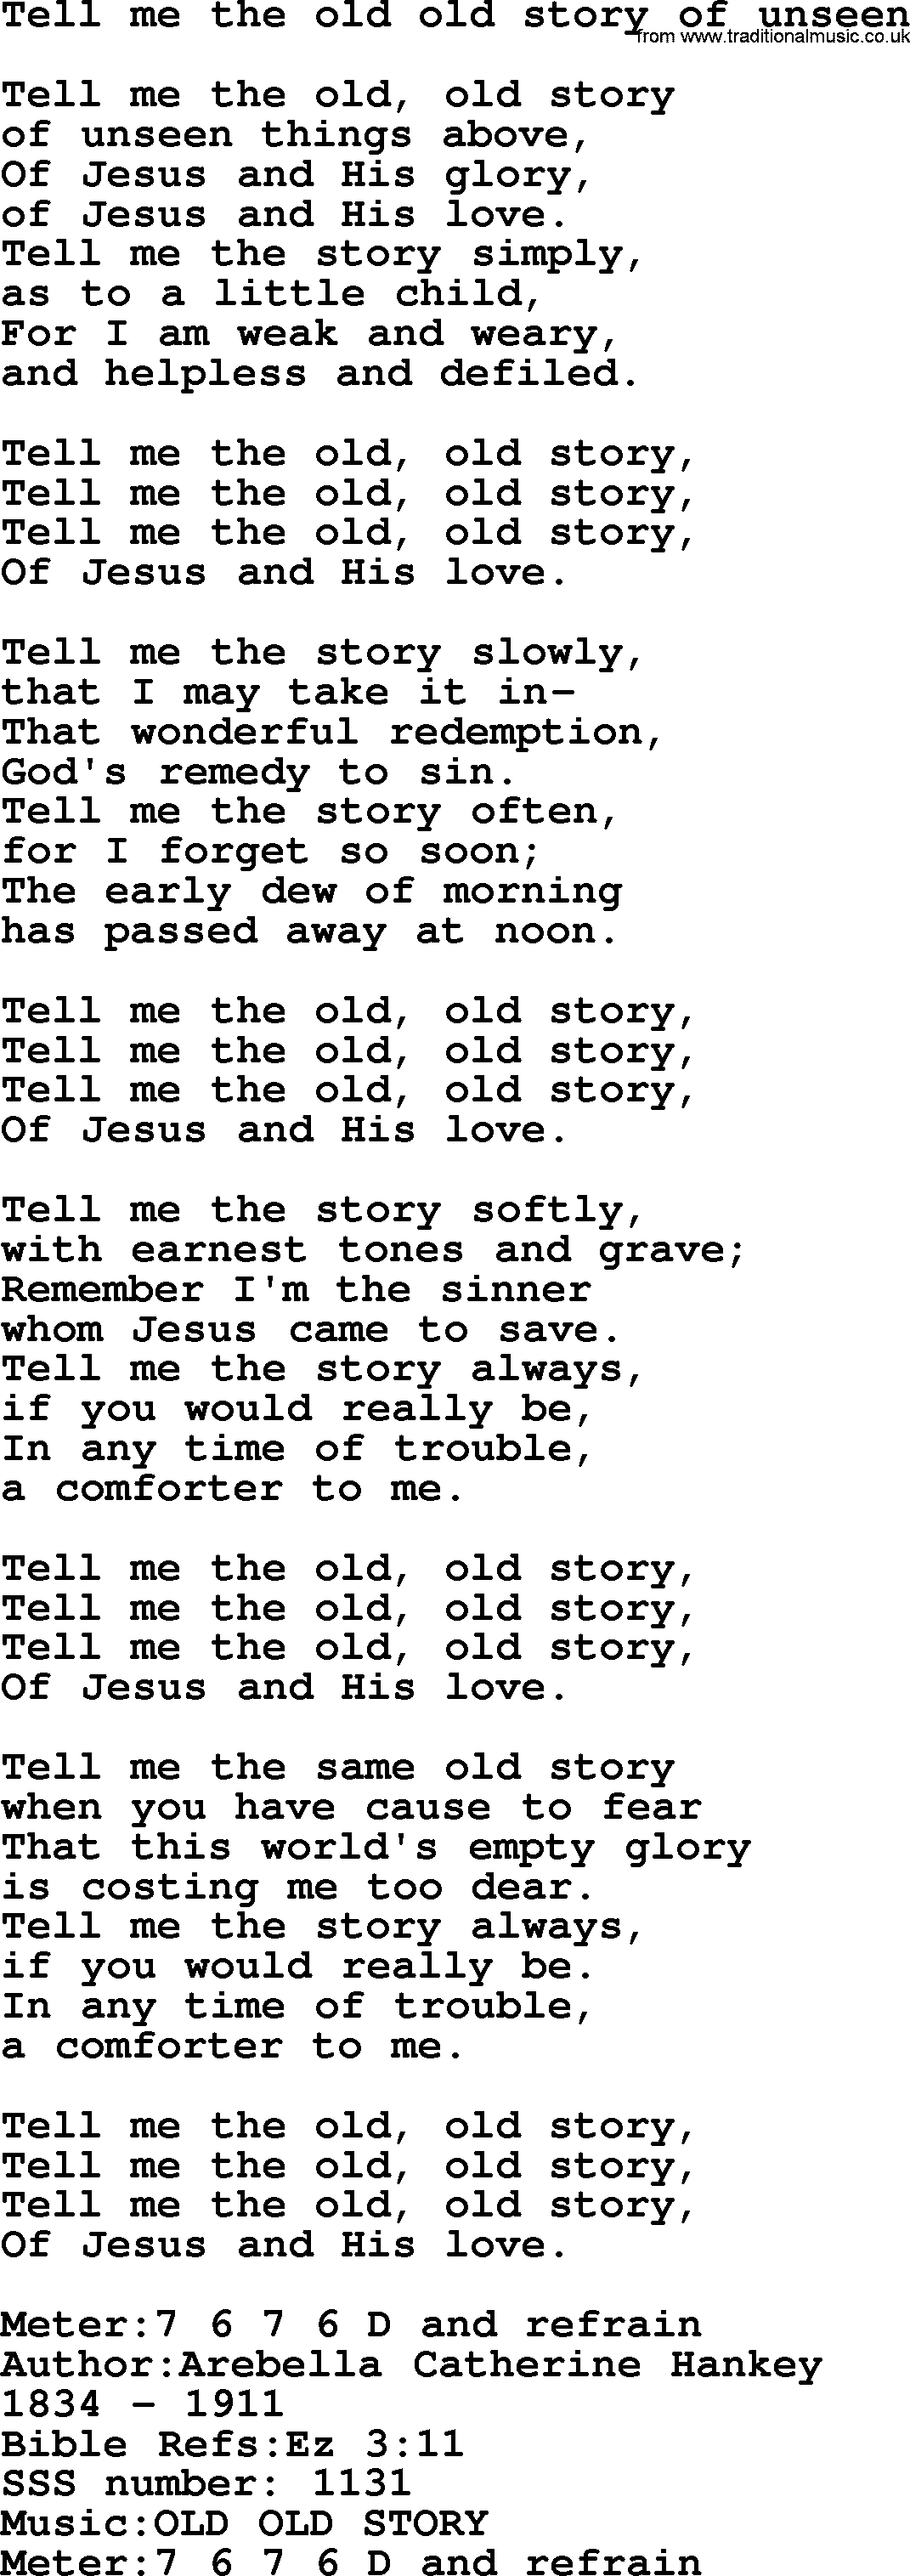 Sacred Songs and Solos complete, 1200 Hymns, title: Tell Me The Old Old Story Of Unseen, lyrics and PDF